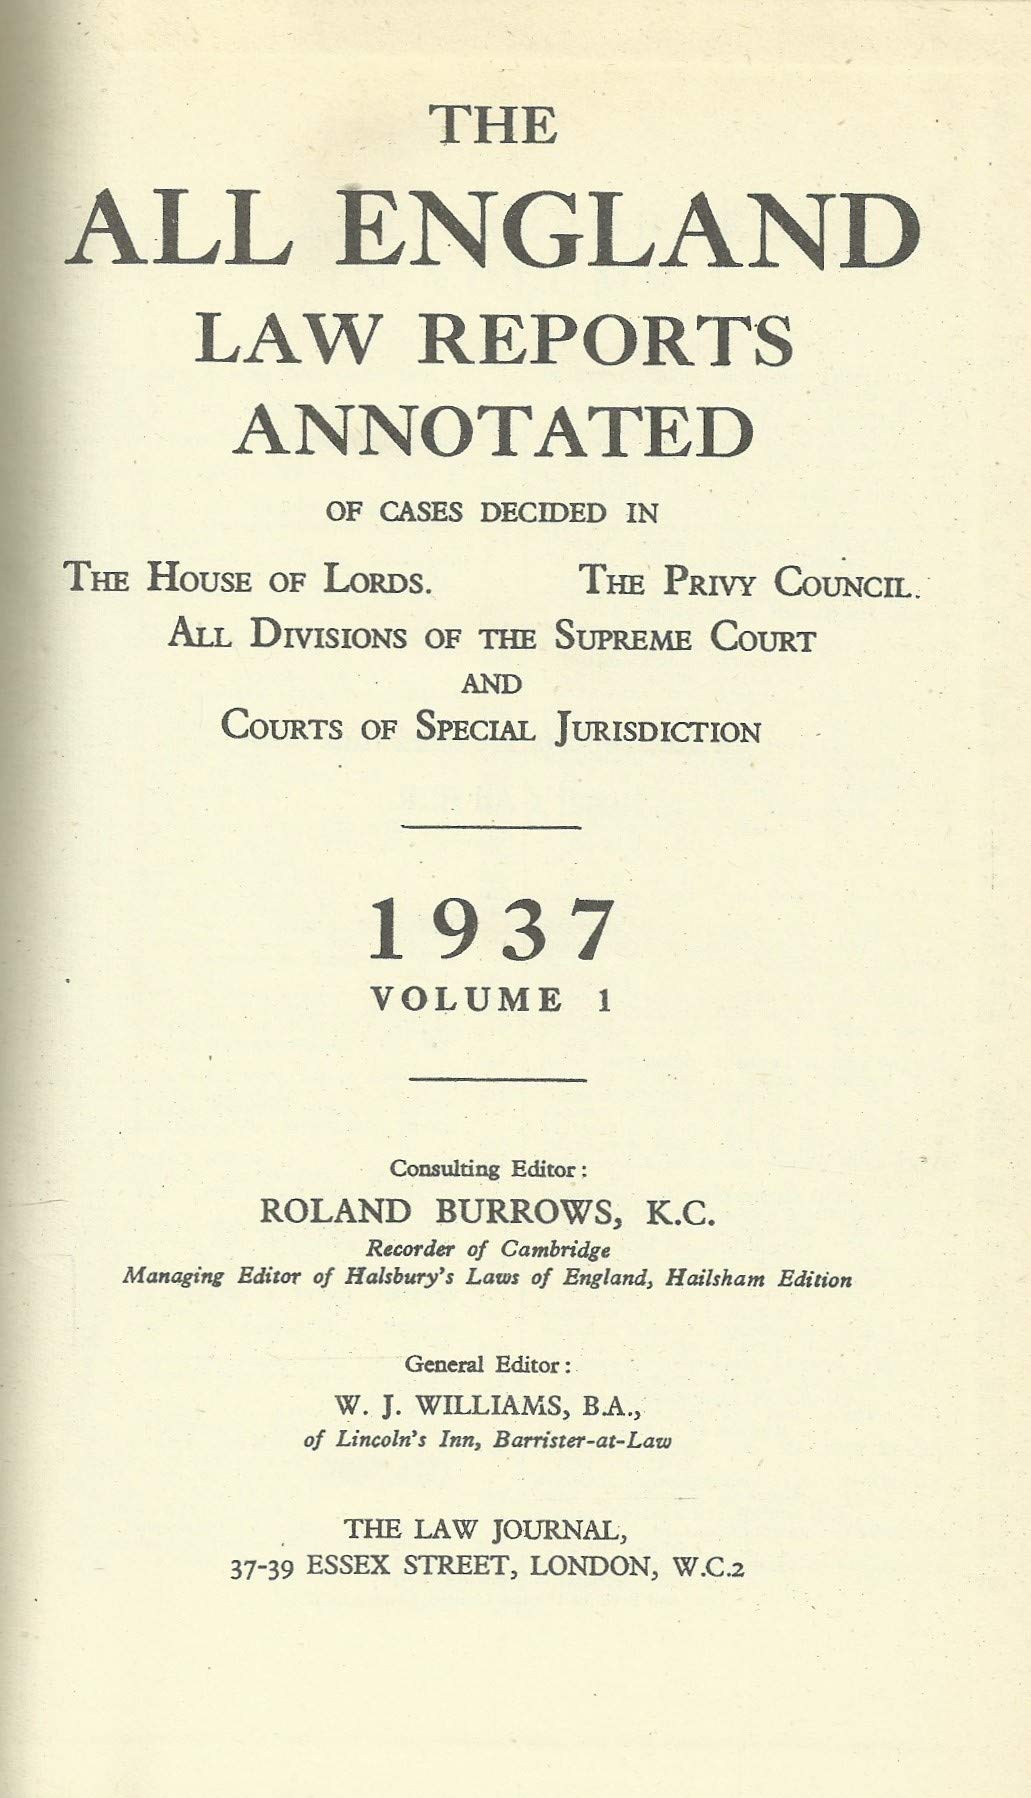 The All England Law Reports. 1937, Volume 1.